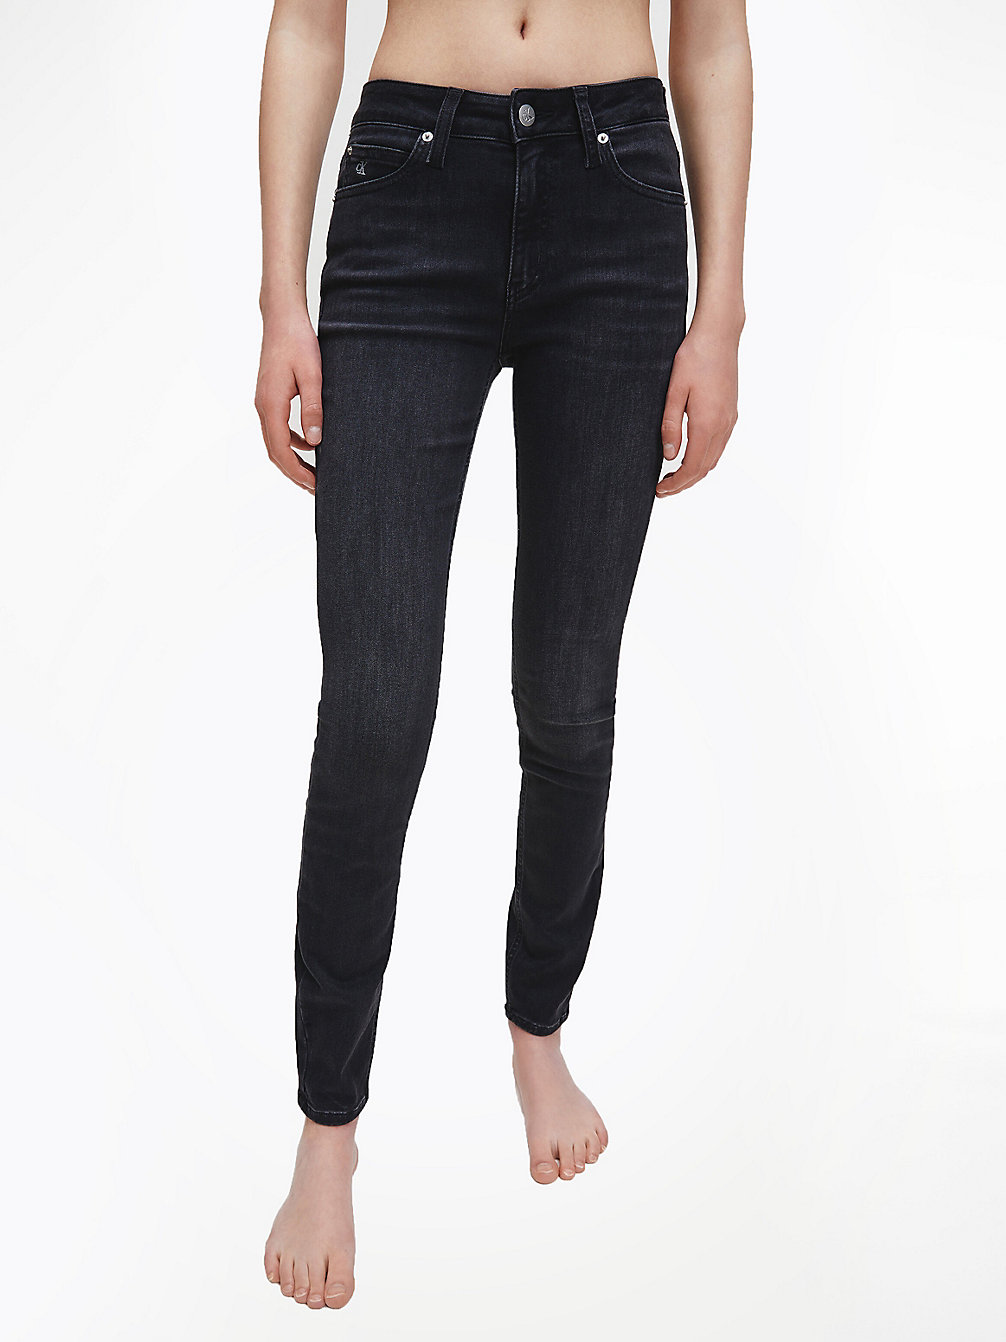 Mid Rise Skinny Jeans > ZZ002 WASHED BLACK > undefined donna > Calvin Klein